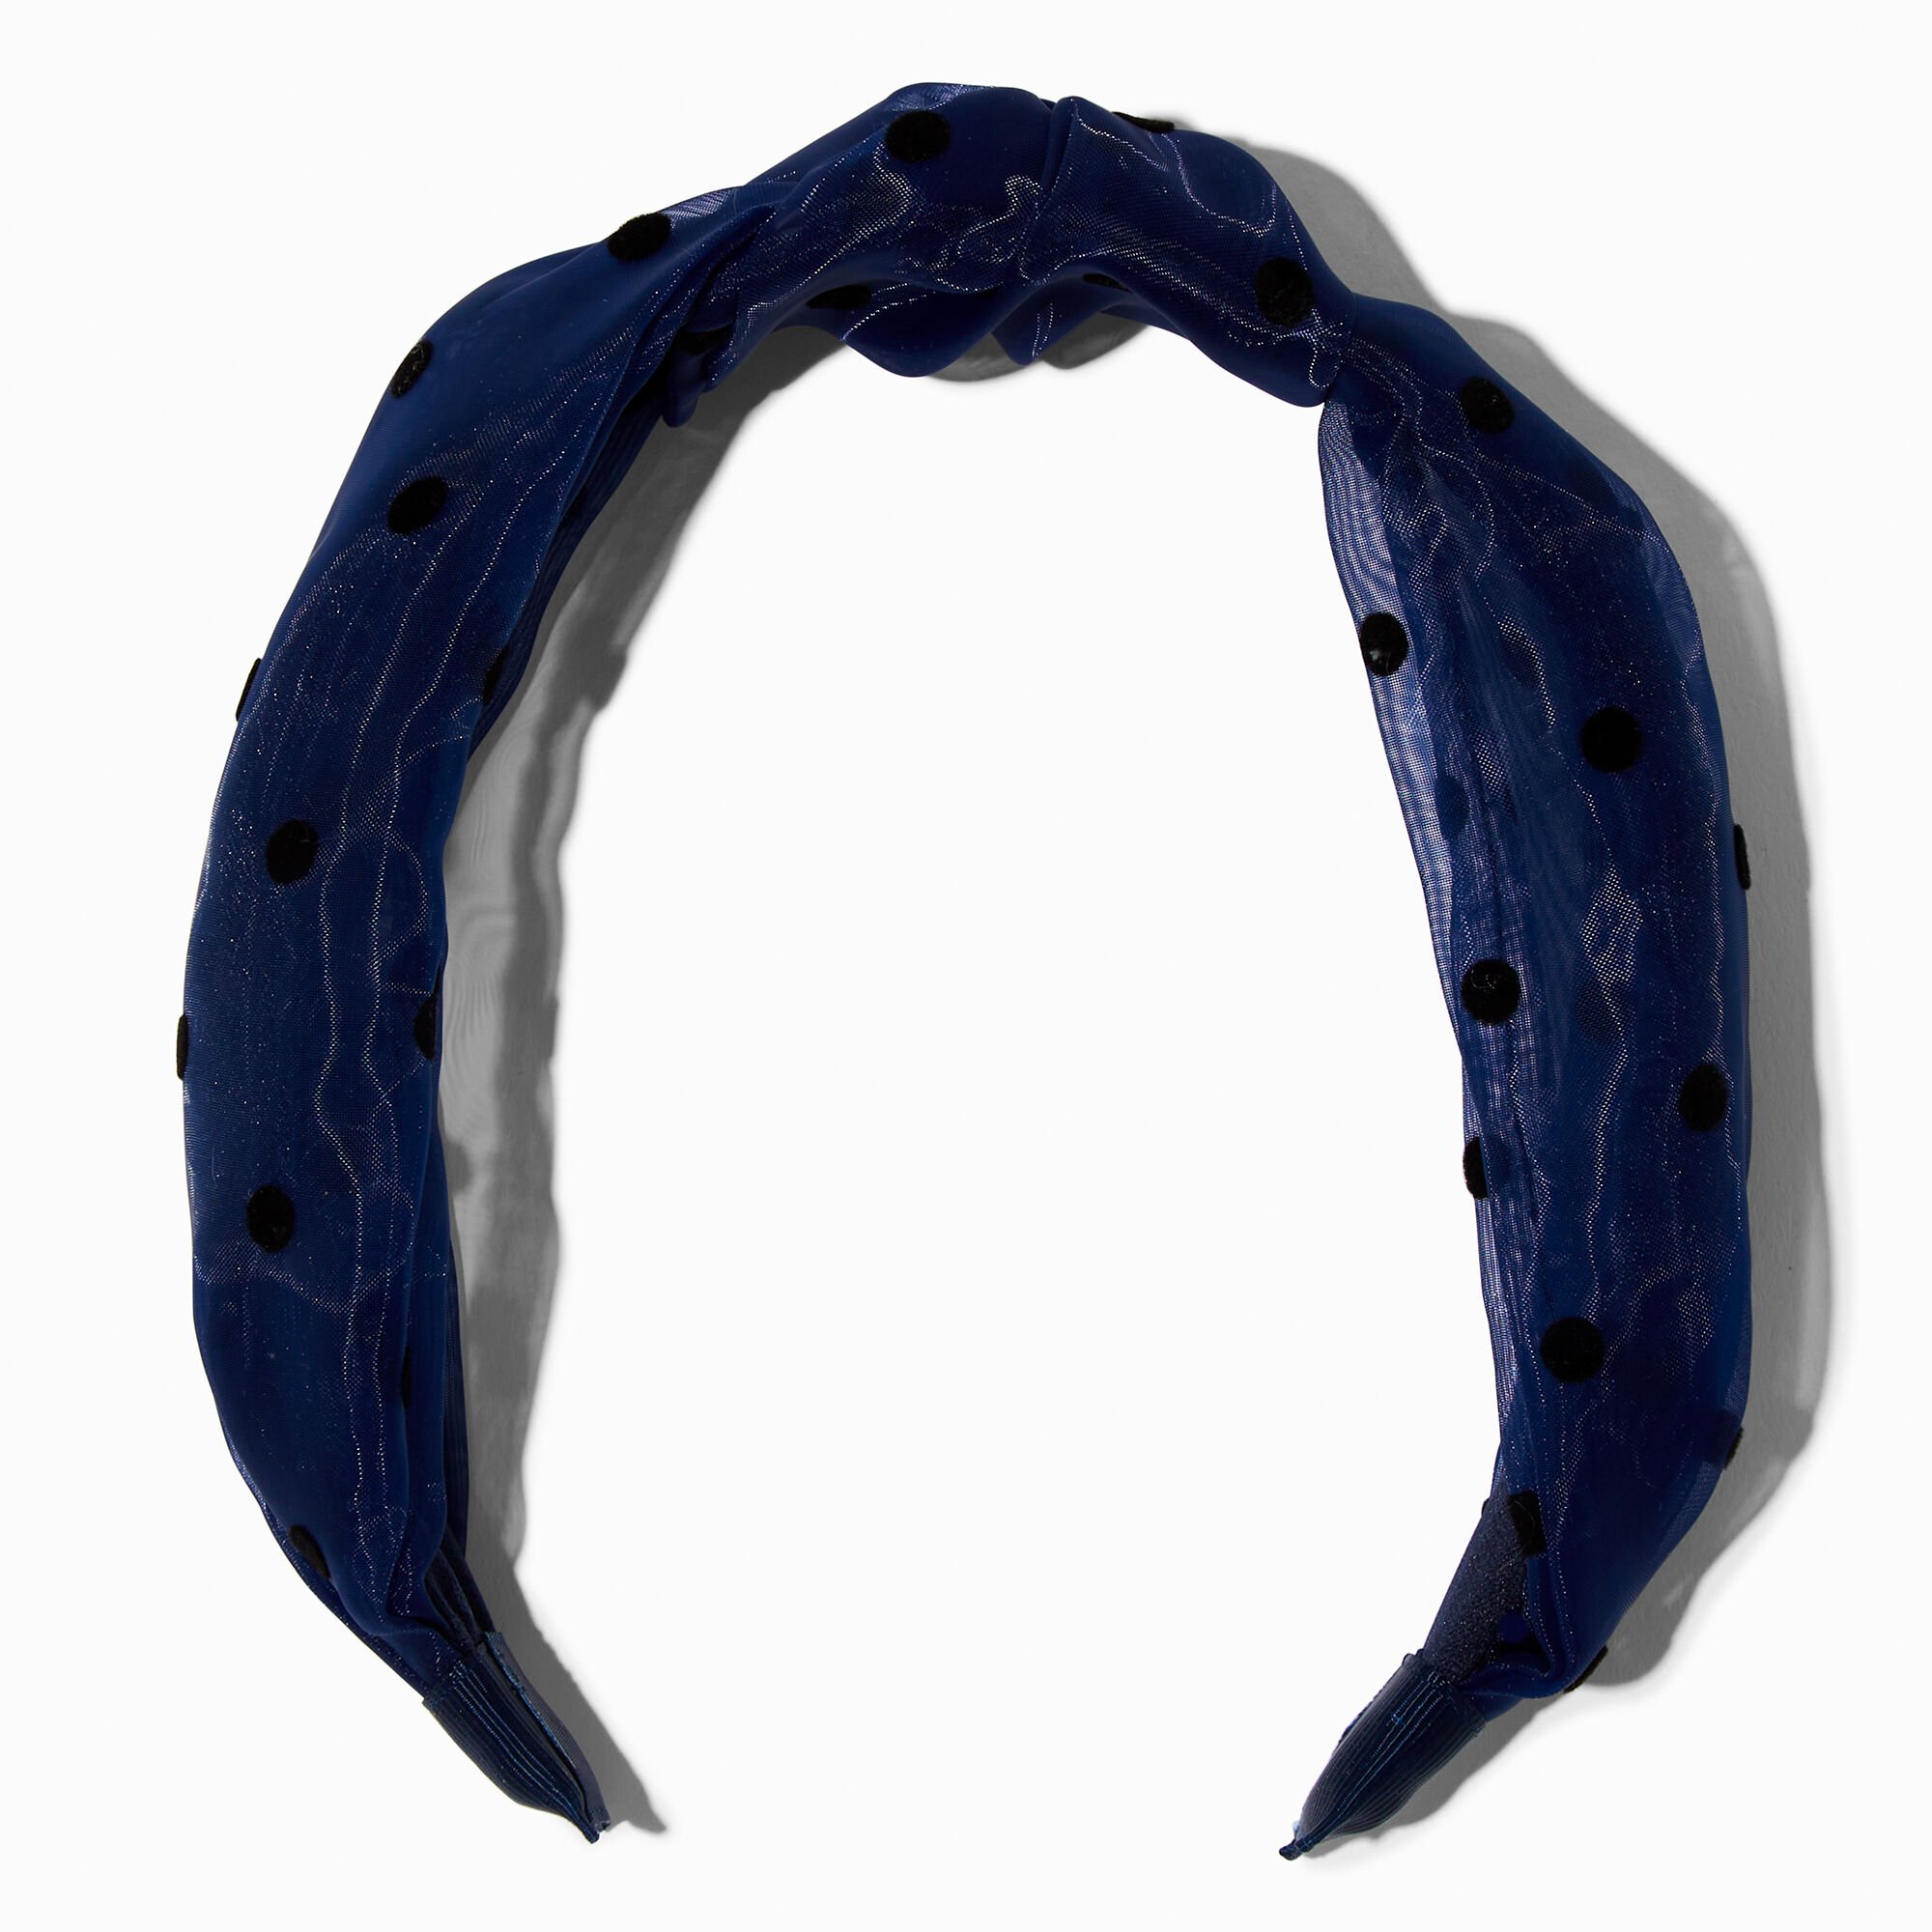 View Claires Polka Dot Sheer Knotted Headband Navy information